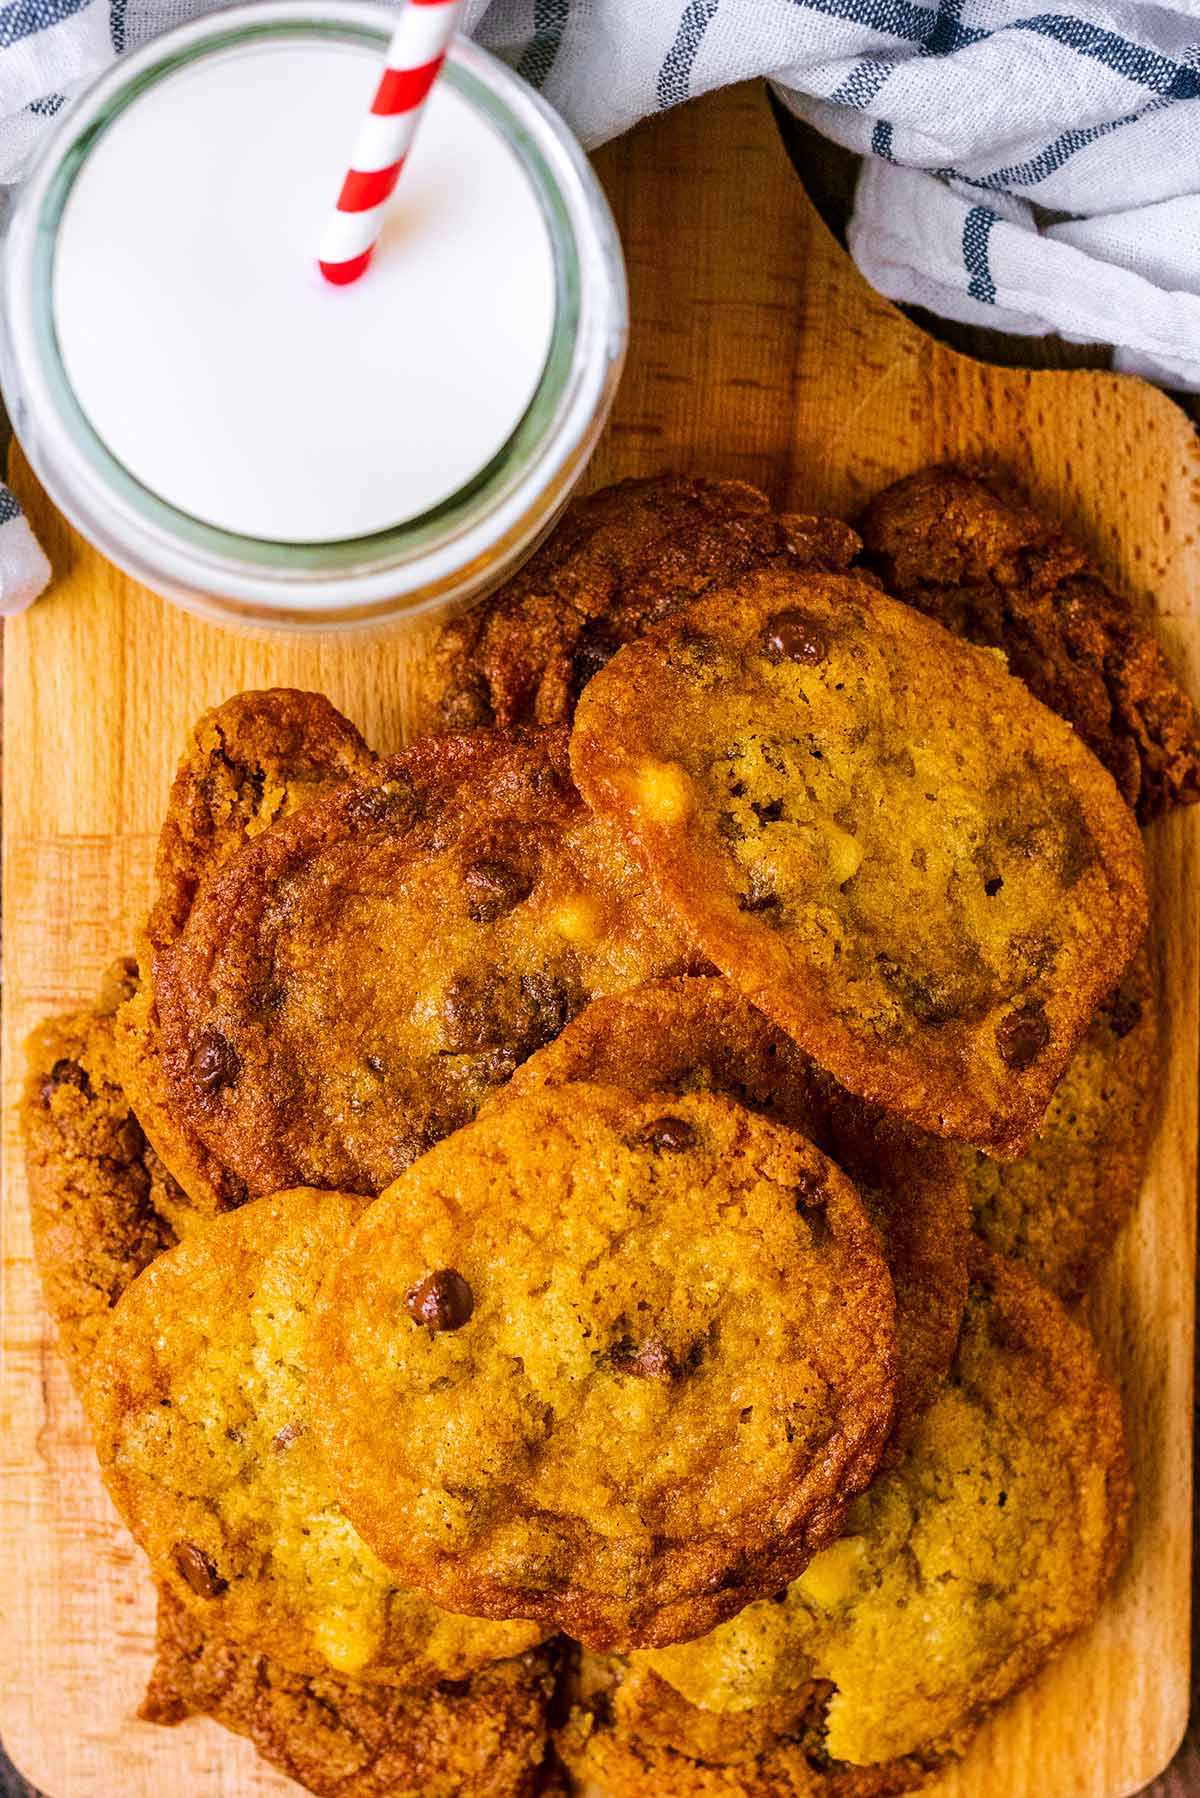 Chocolate chip cookies on a board with a glass of milk.